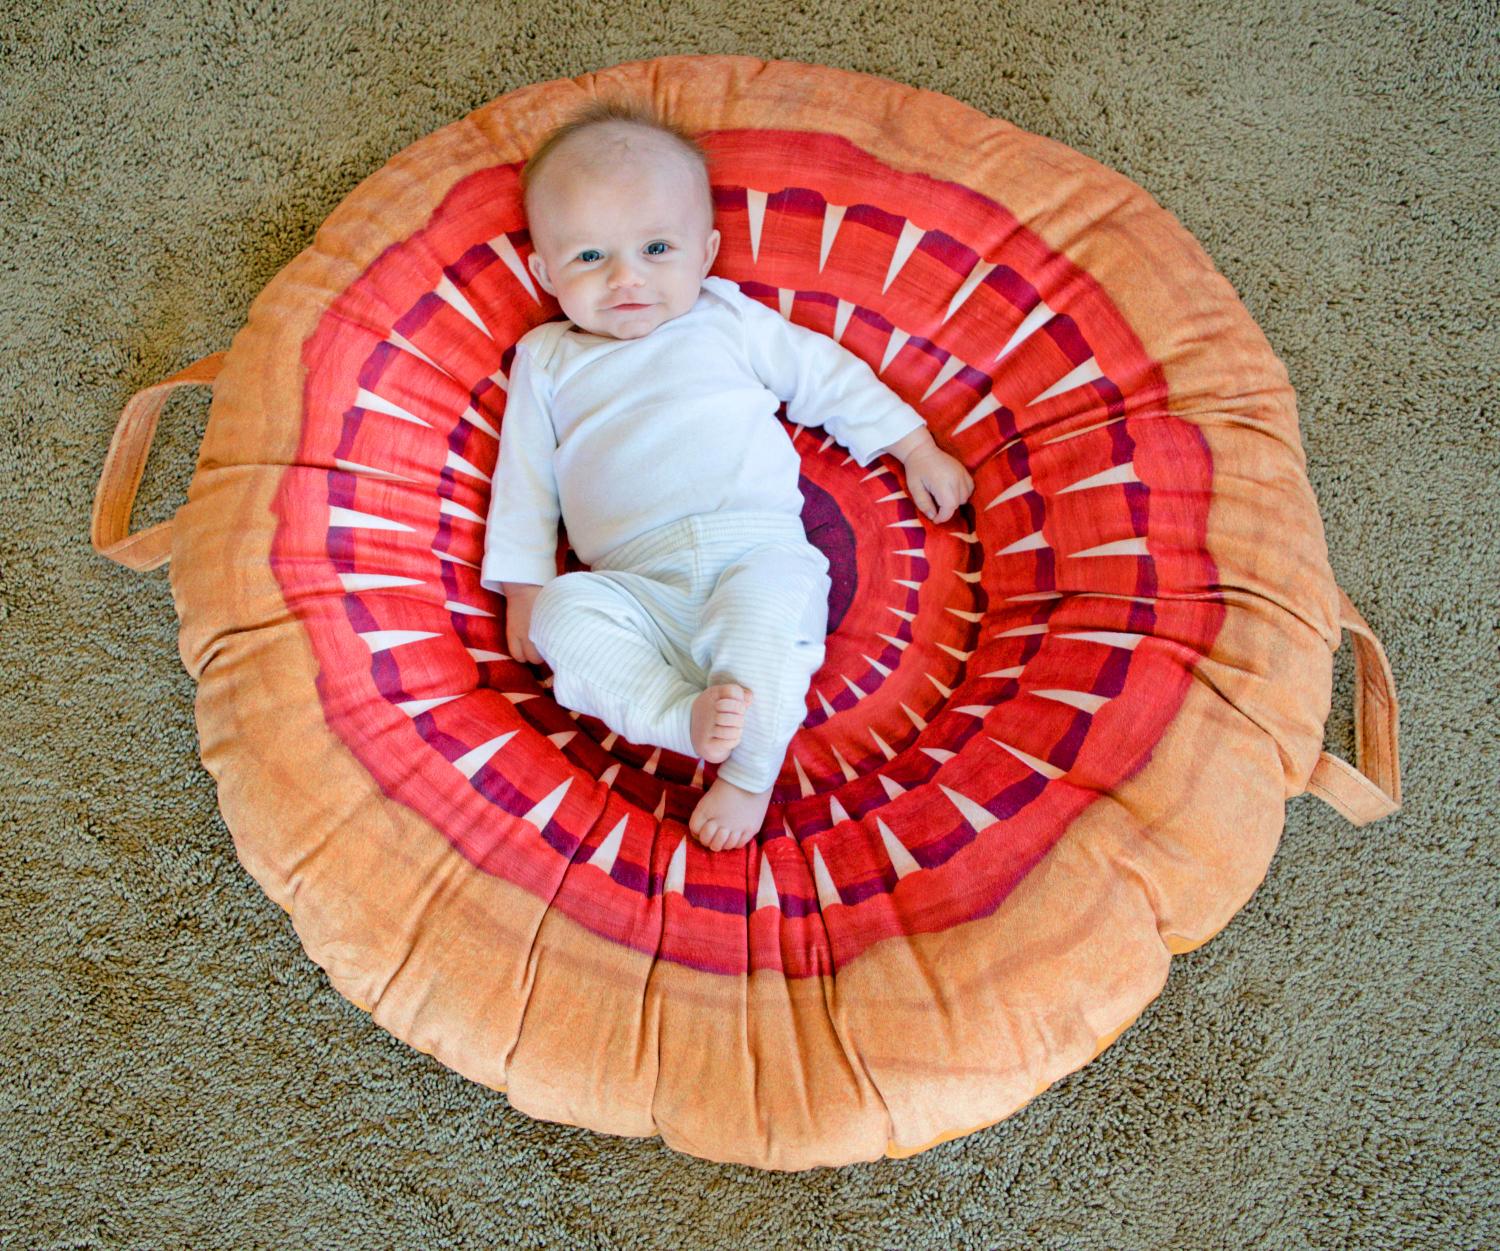 Star Wars Sarlacc Pit Pillow - The Great Pit Of Carkoon baby pillow, dog/cat bed